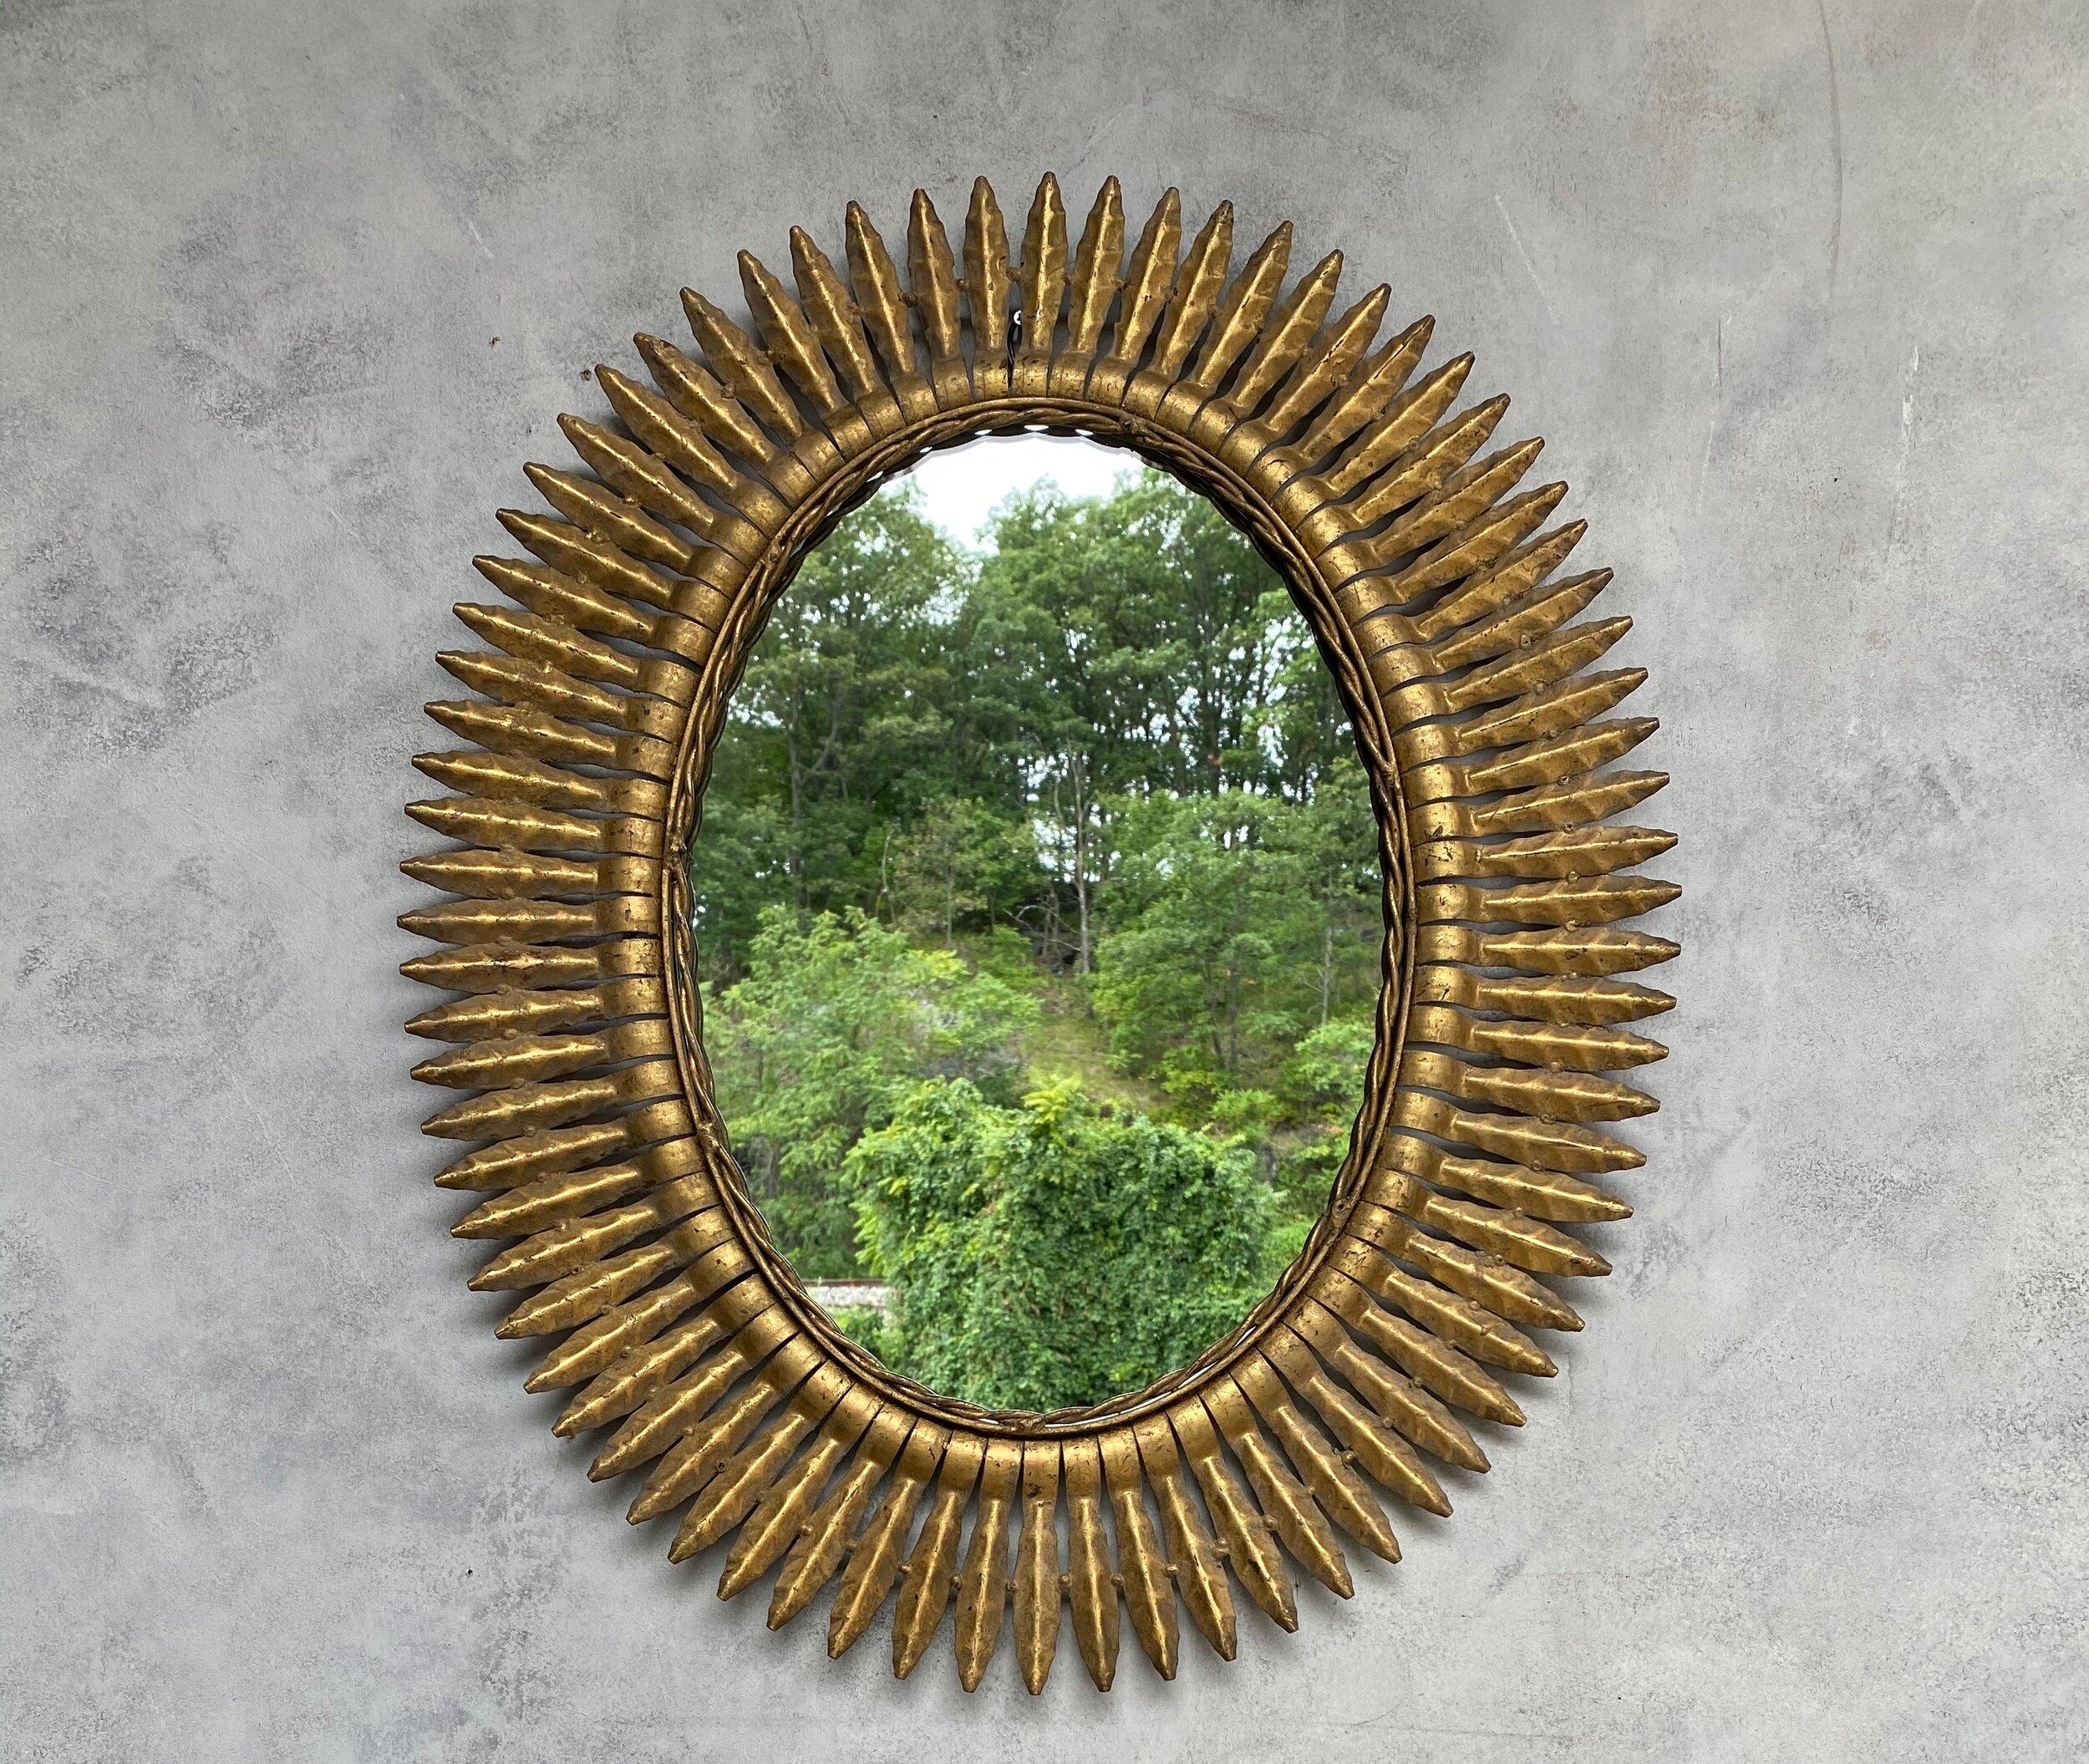 A large oval gilt metal sunburst mirror with small pointed rays arranged to form a tightly fitted frame, Spanish, 1950s. We recently added a felt backing to the mirror to give it more protection and a finished look. Very good vintage